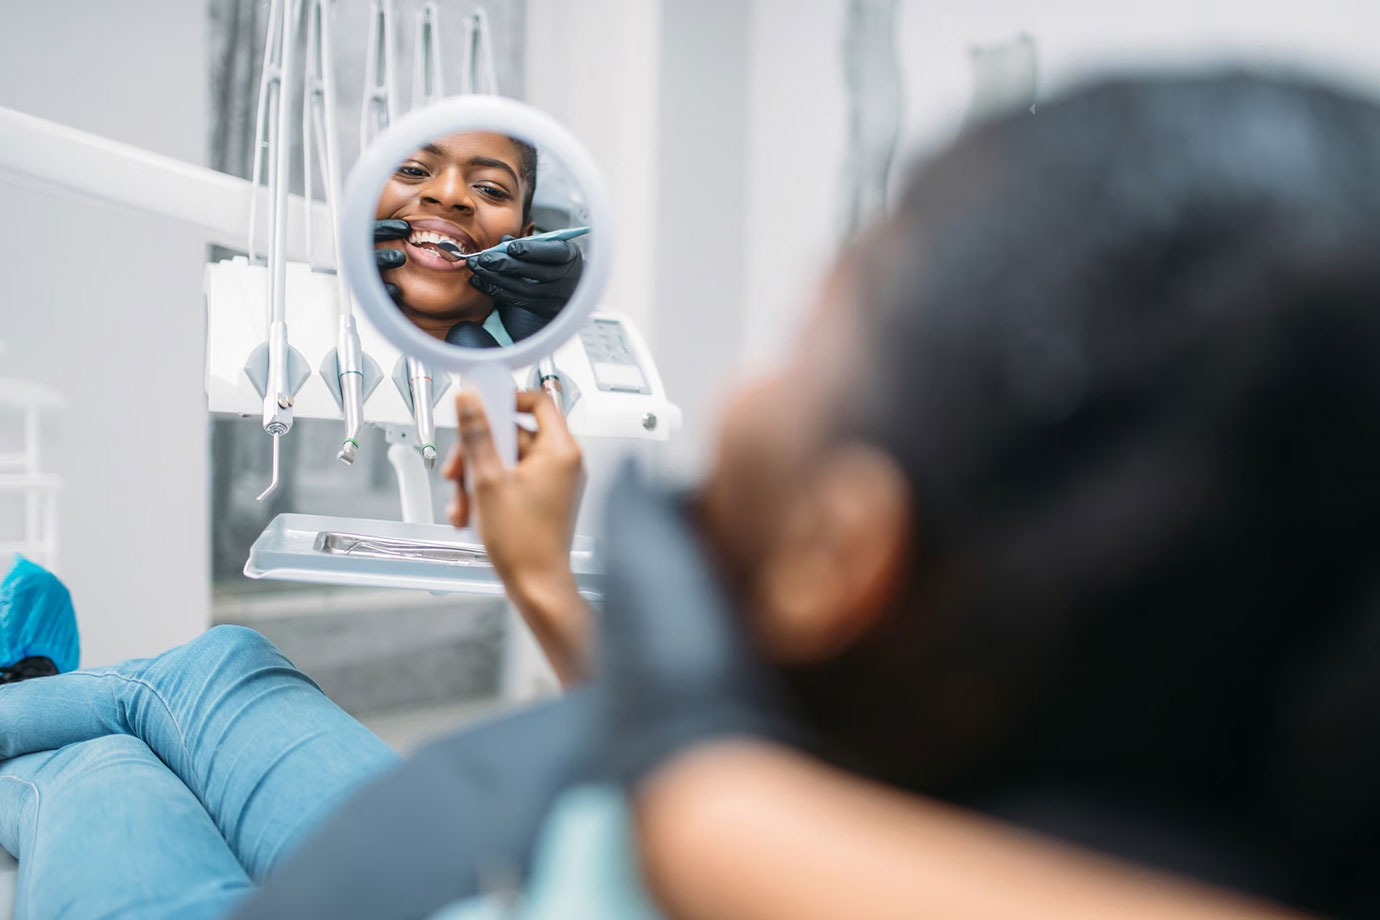 Get the Smile You Deserve: Dental Financing with Bad Credit Available Now